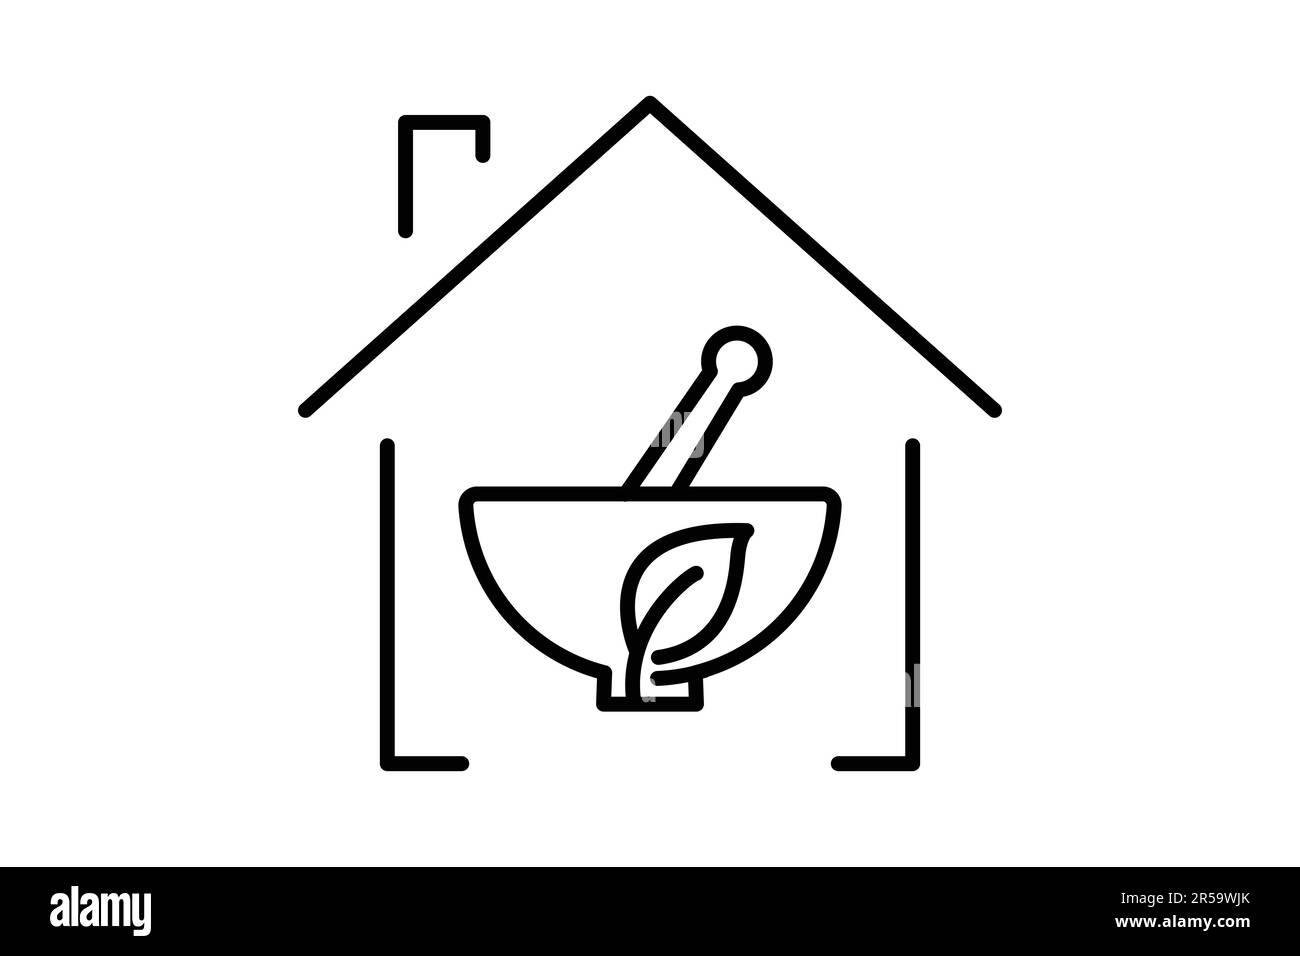 herbal medicine icon. leaves in house. icon related to herbal medicine house, healthy house. Line icon style design. Simple vector design editable Stock Vector